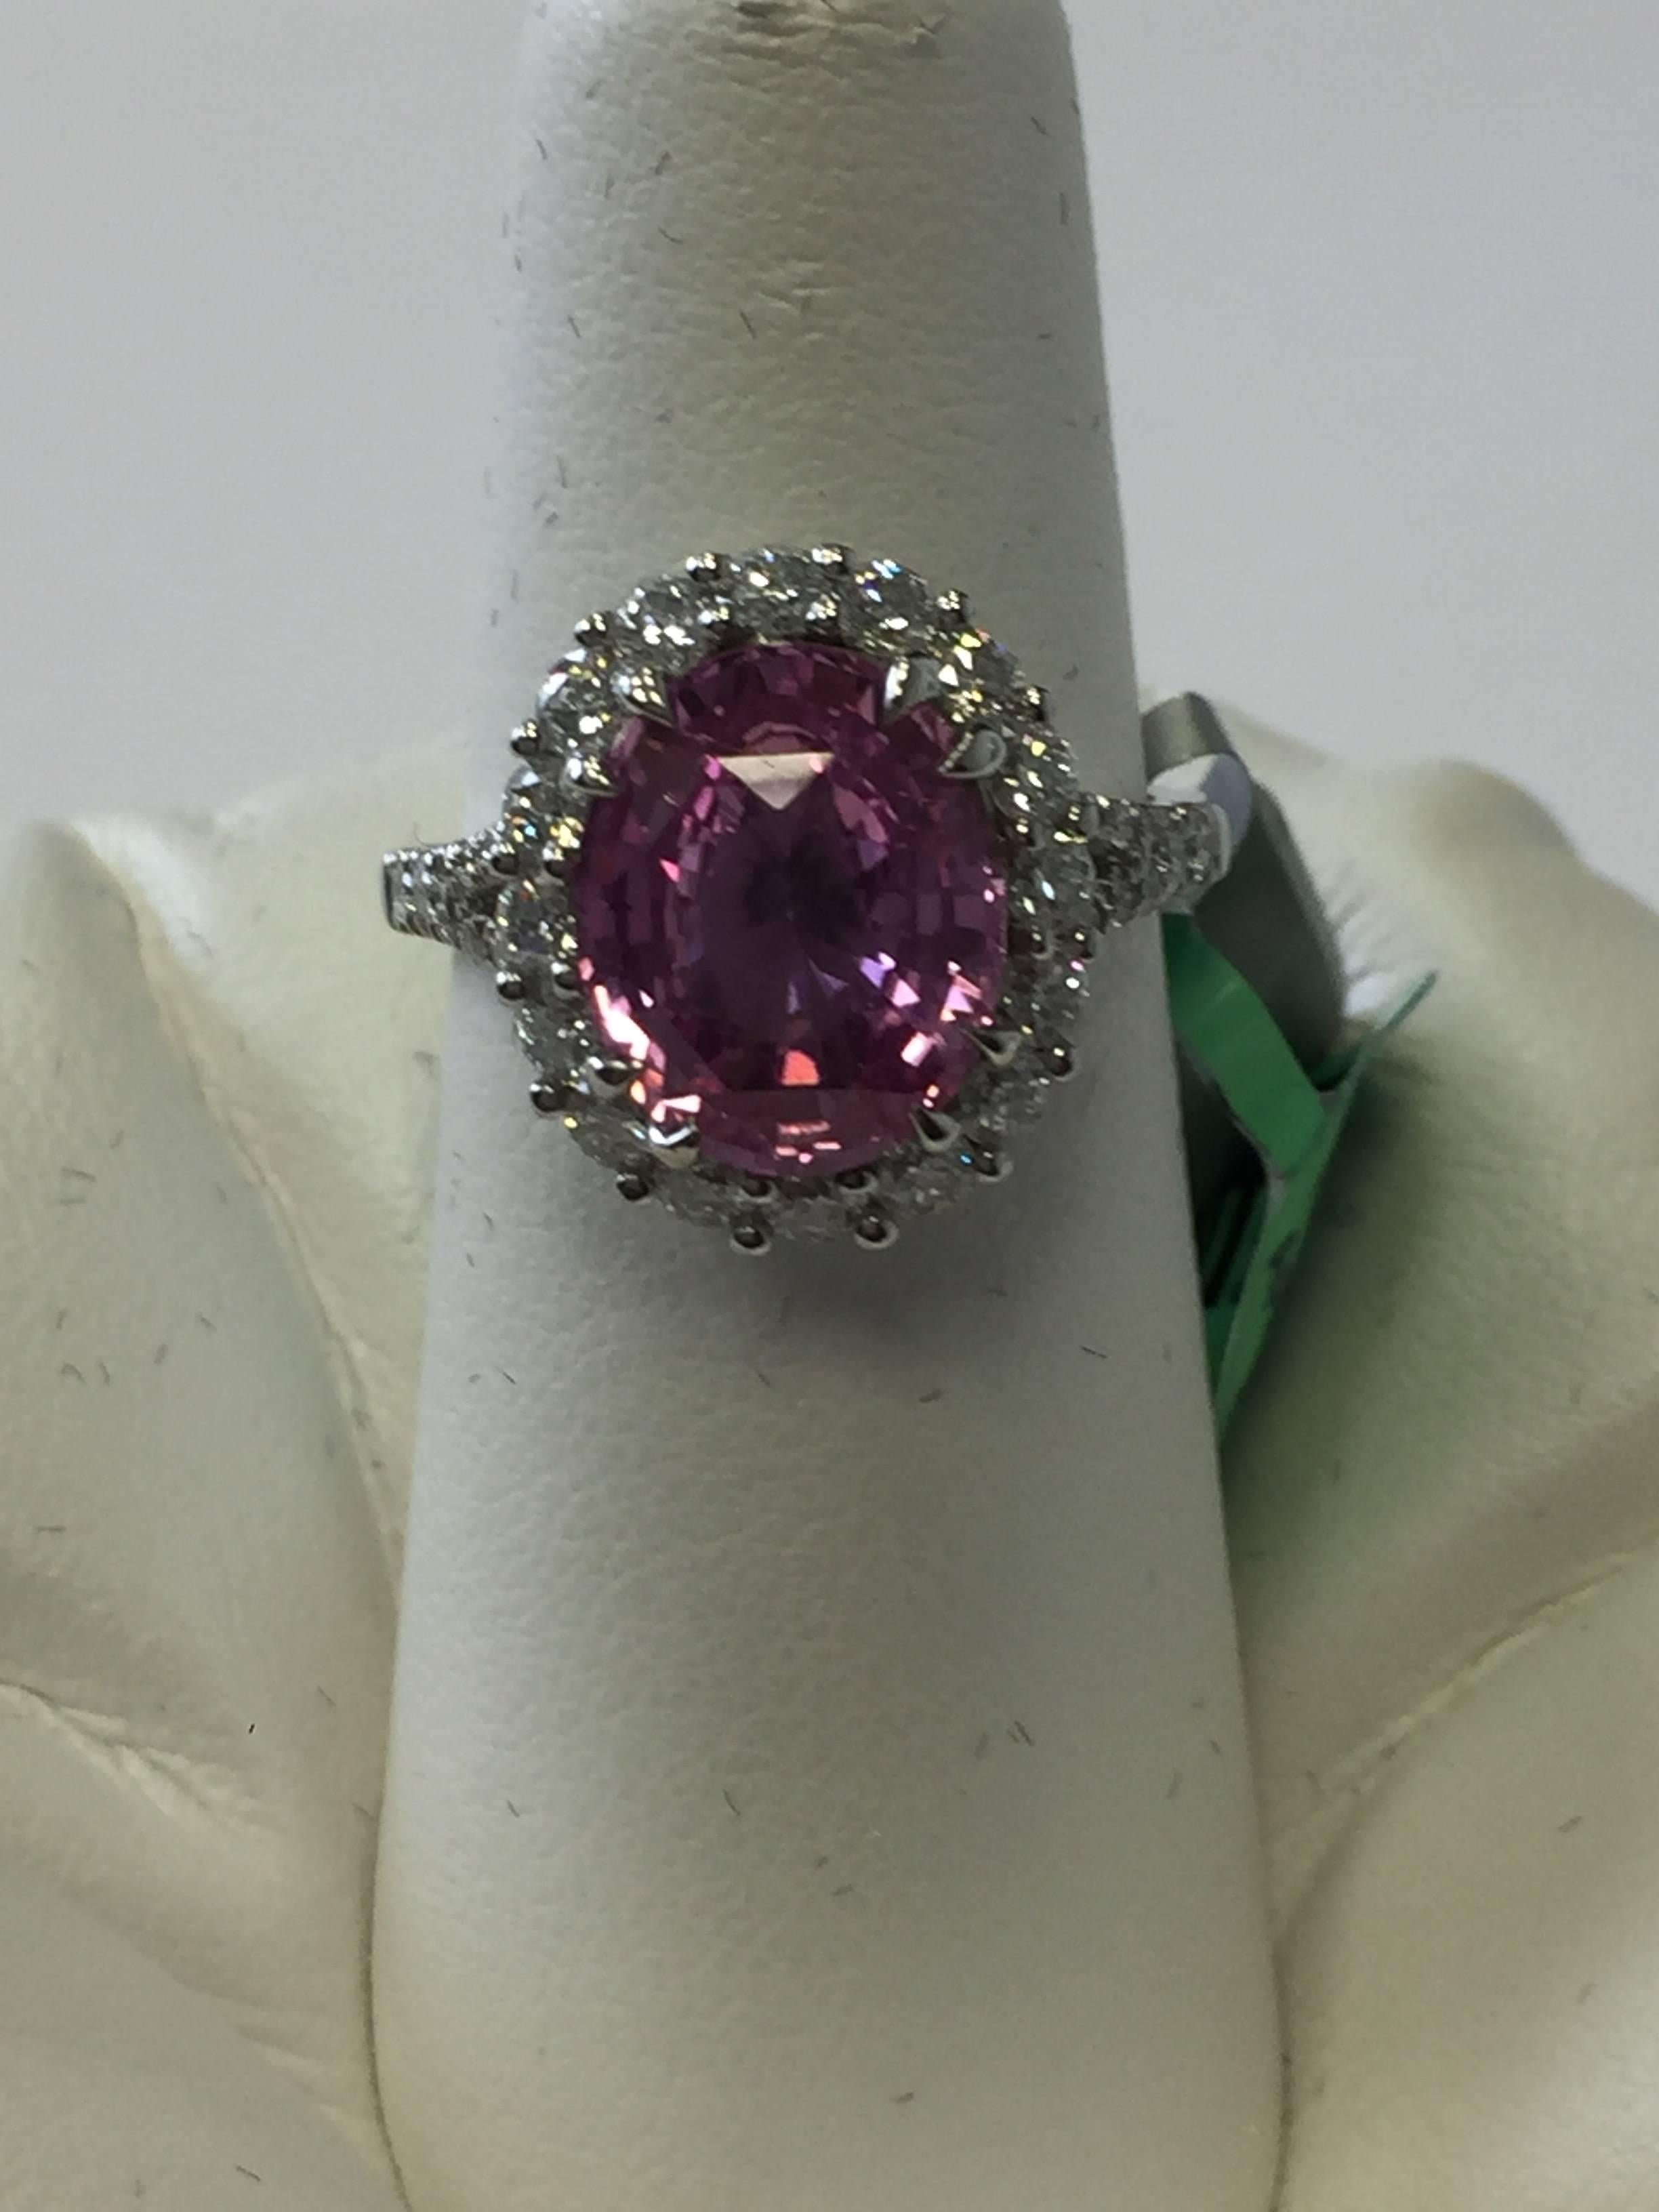 Gorgeous 4.73 carats Madagascar pink sapphire oval surrounded by 1.11 carats of diamond rounds.  This platinum estate cocktail ring is size 6.5 and comes with an AGL lab report.  A beautiful addition to any collection!